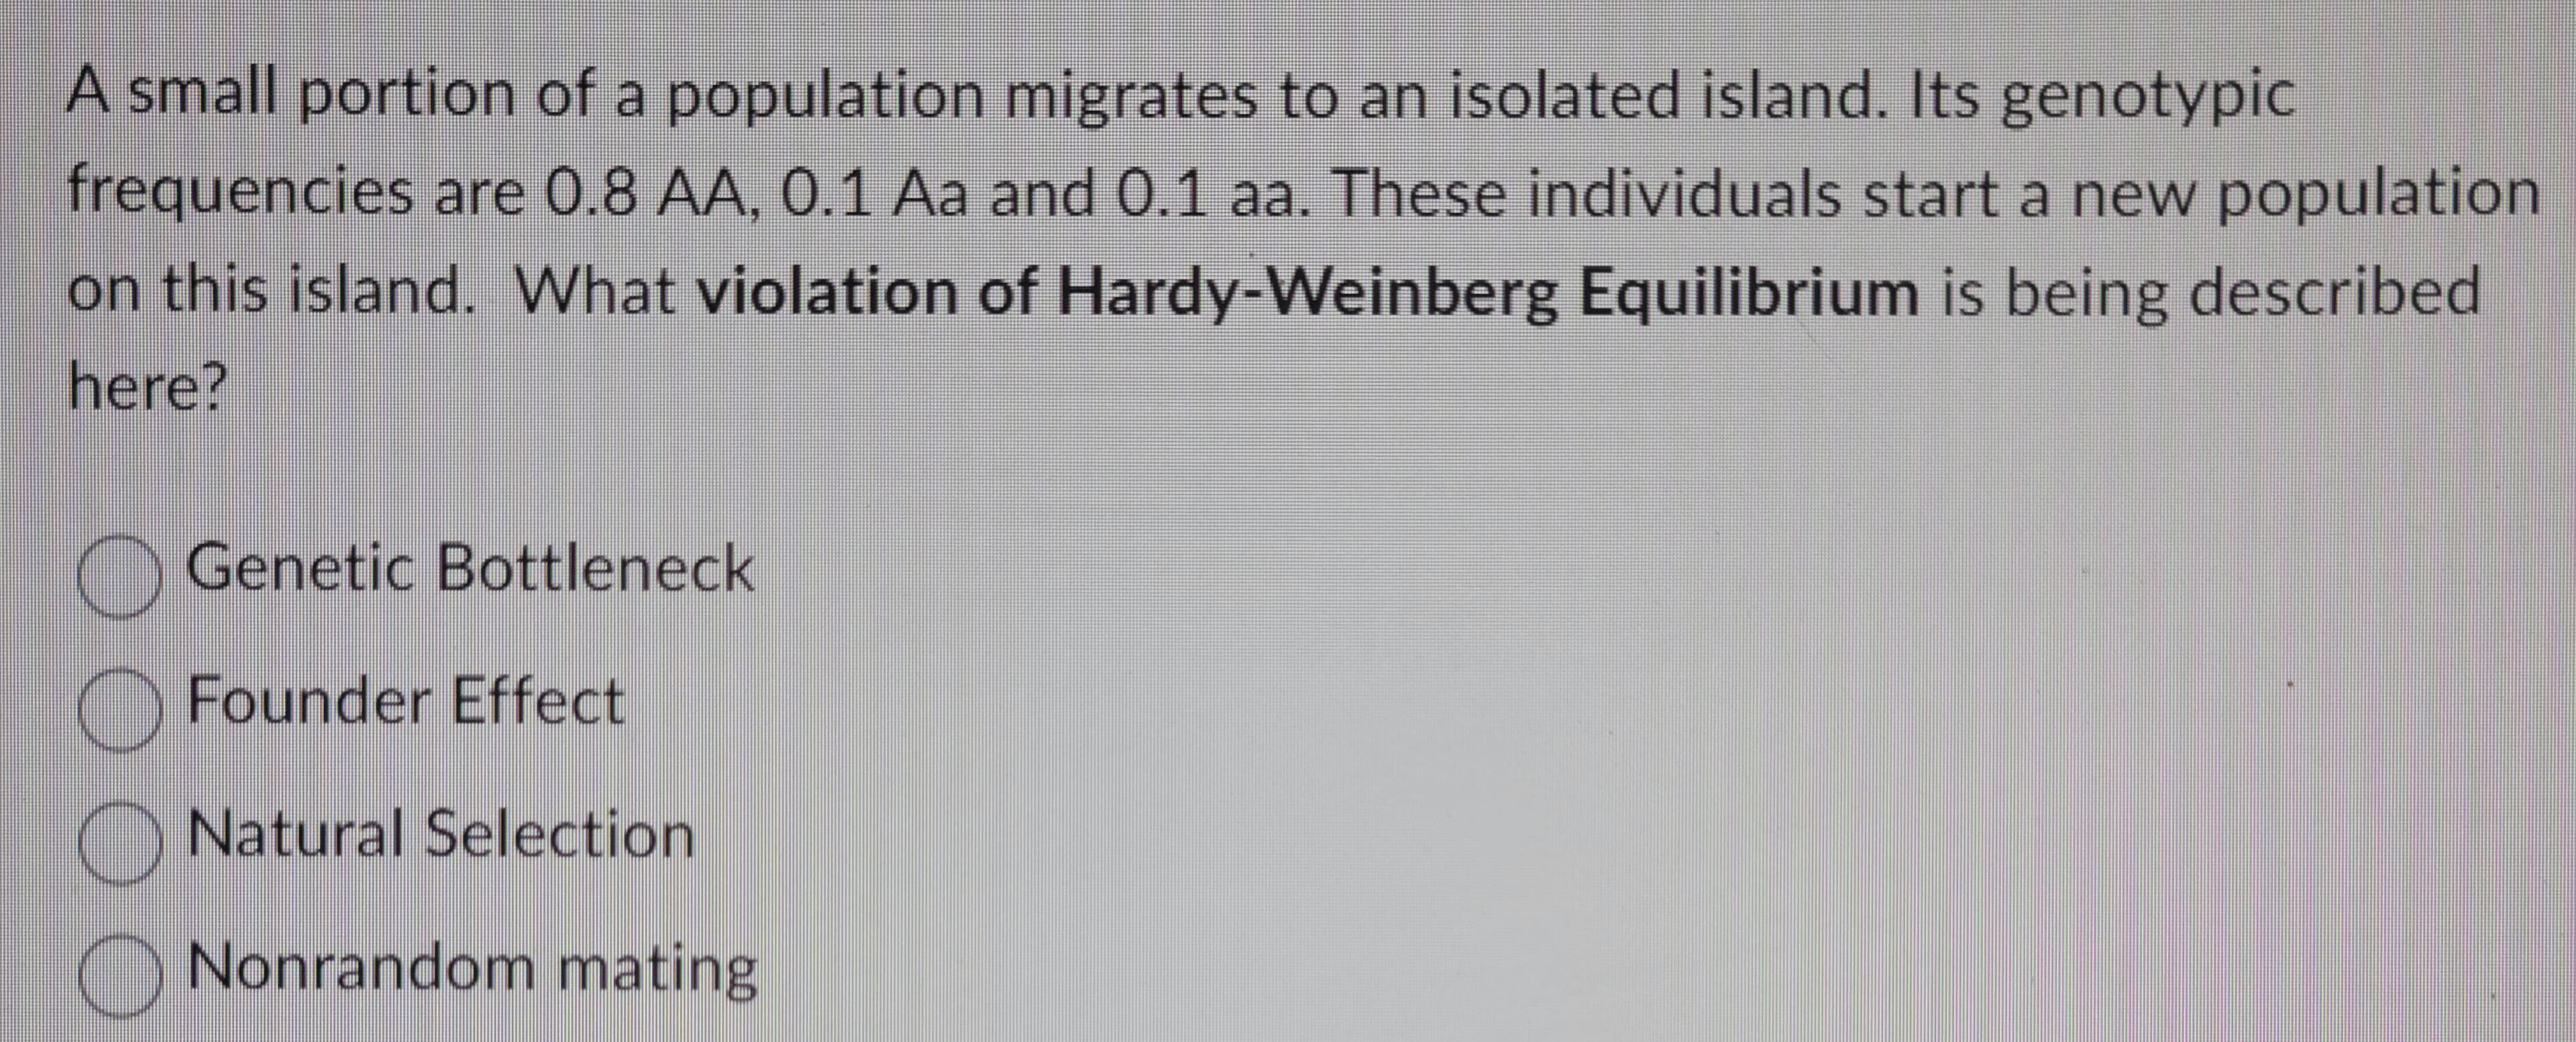 A small portion of a population migrates to an isolated island. Its genotypic
frequencies are 0.8 AA, 0.1 Aa and 0.1 aa. These individuals start a new population
on this island. What violation of Hardy-Weinberg Equilibrium is being described
here?
00
Genetic Bottleneck
Founder Effect
Natural Selection
Nonrandom mating